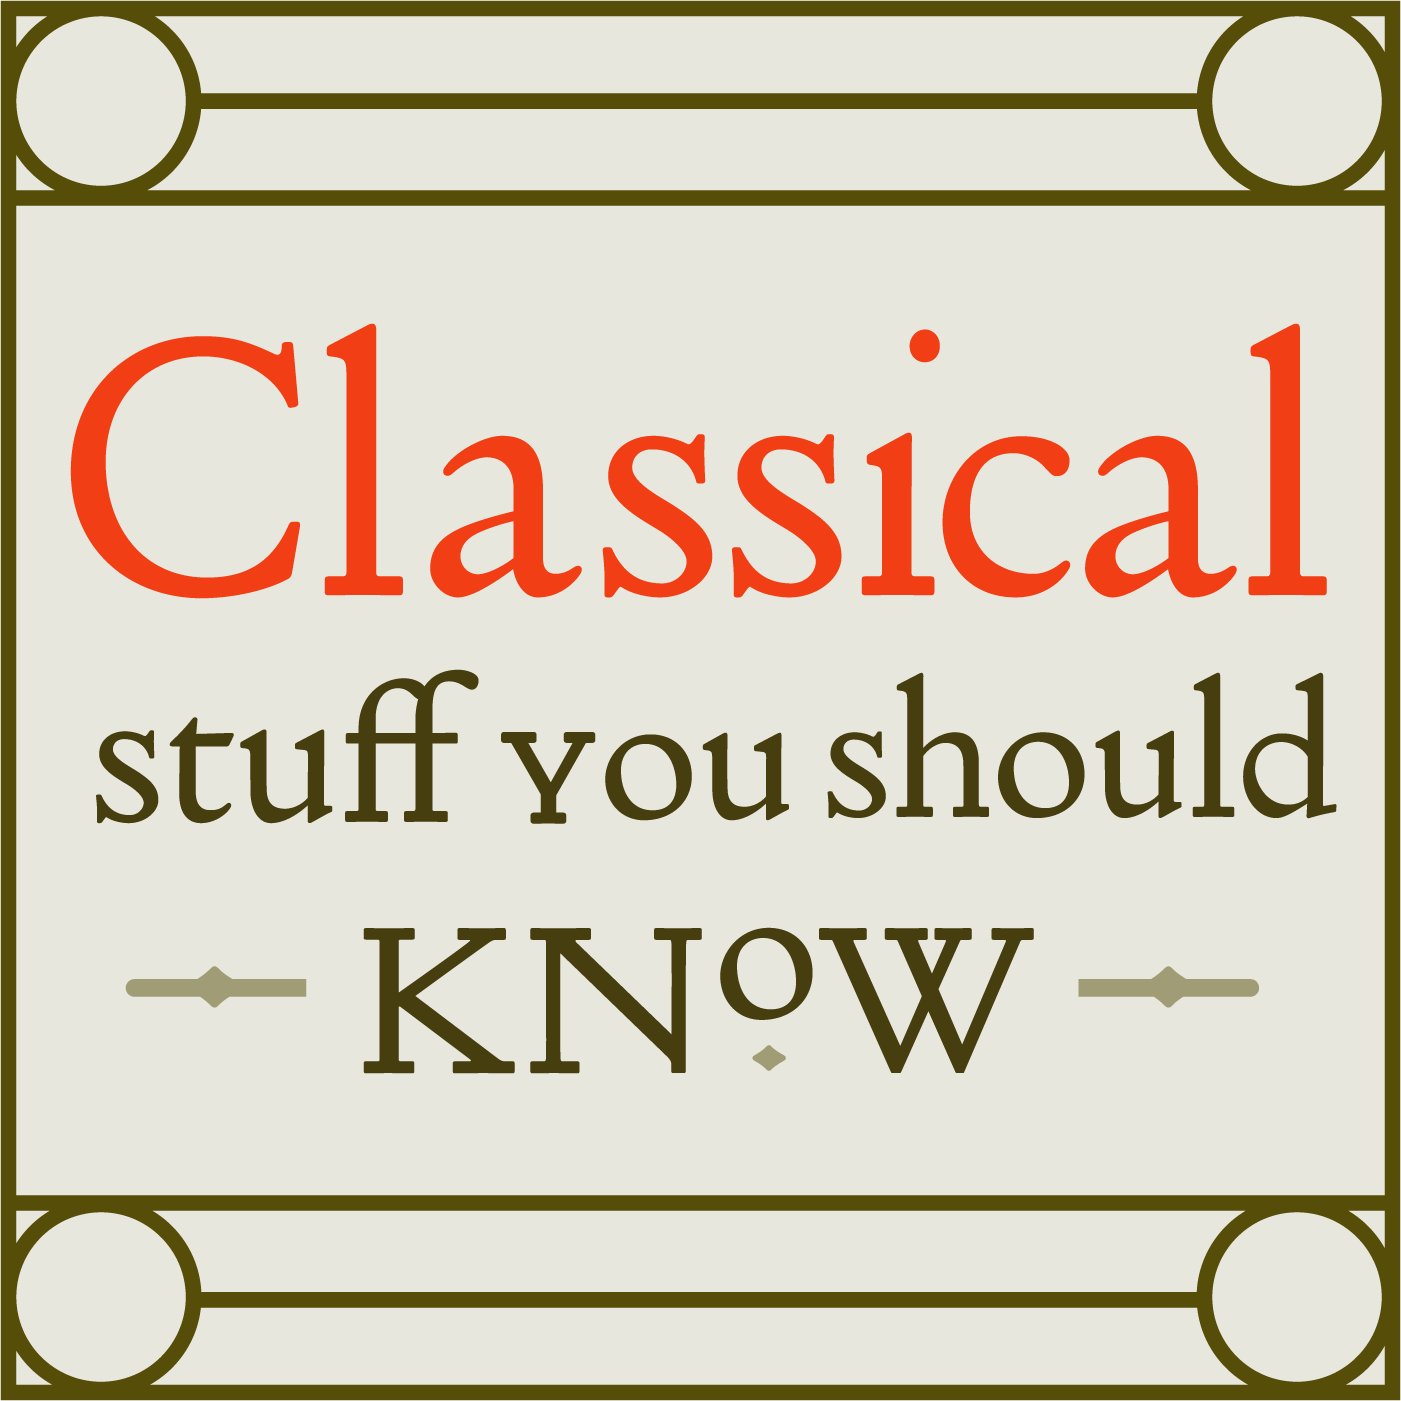 A podcast on Classical Education